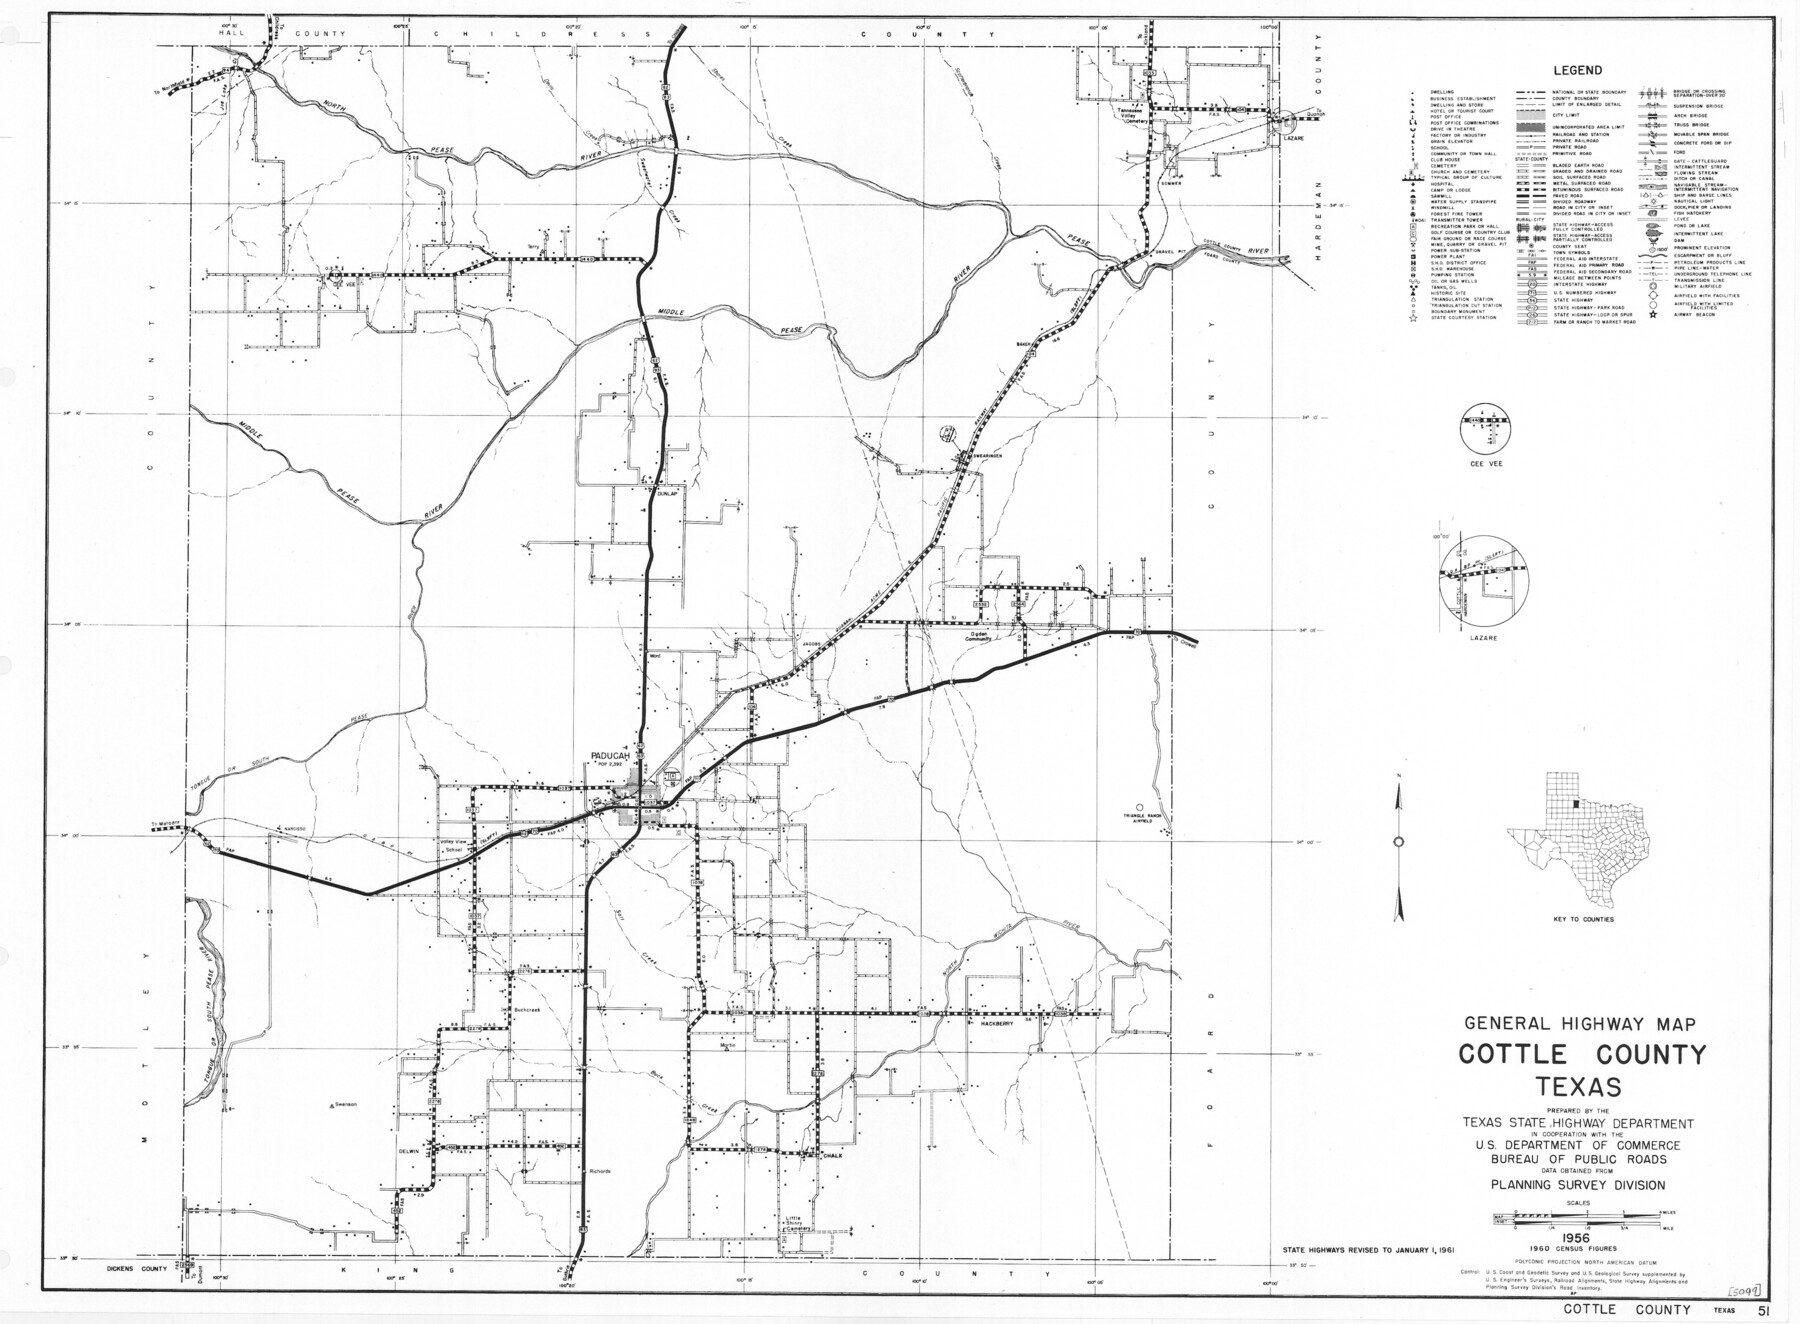 79423, General Highway Map, Cottle County, Texas, Texas State Library and Archives